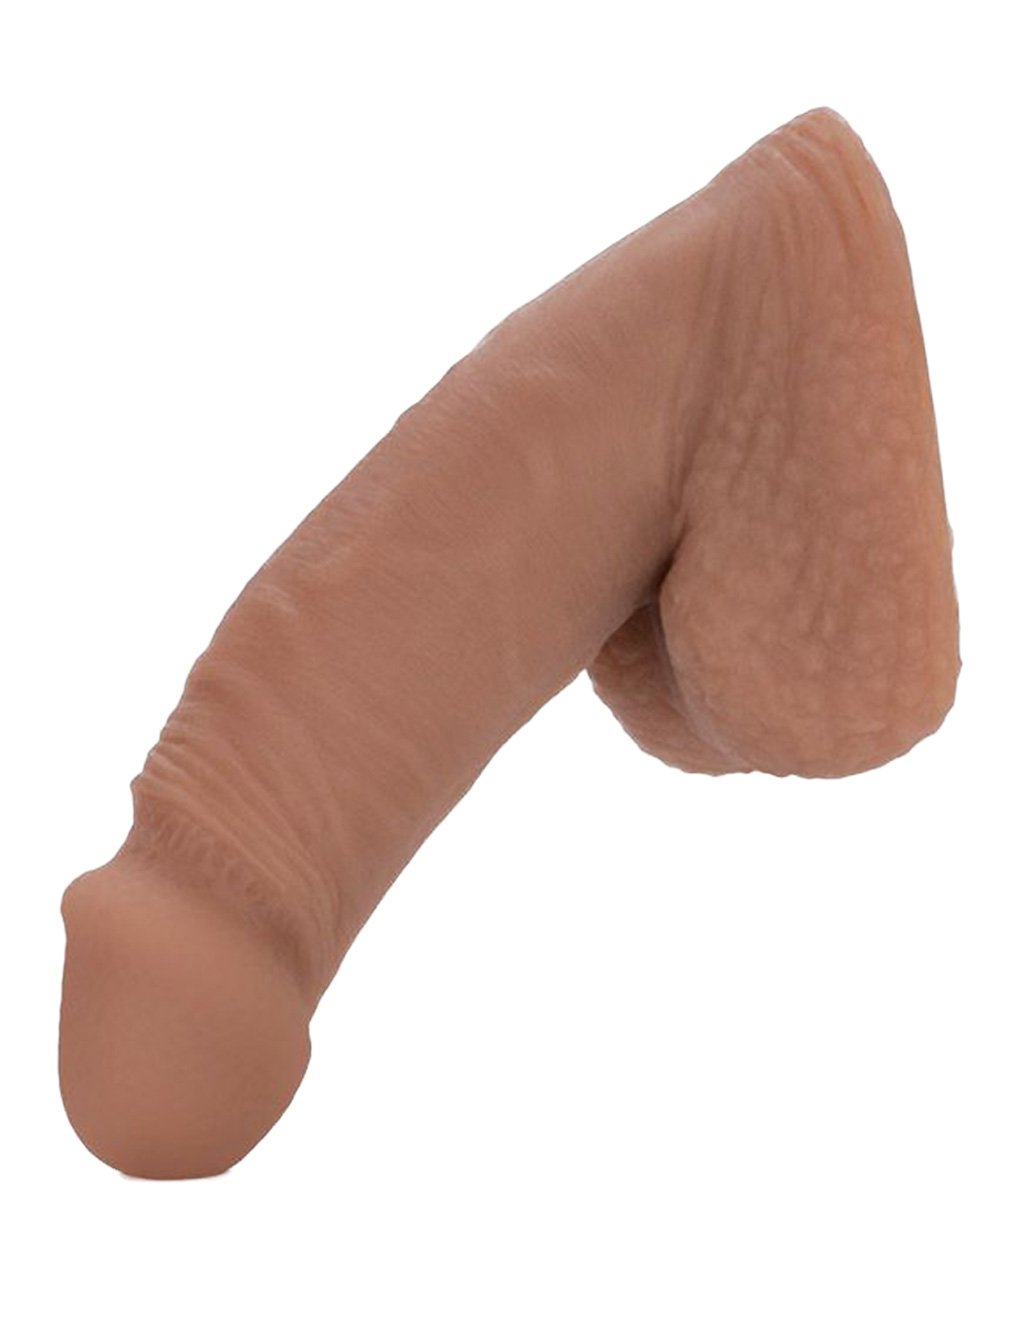 Packer Gear 5 Inch Packing Penis- Brown- Side view